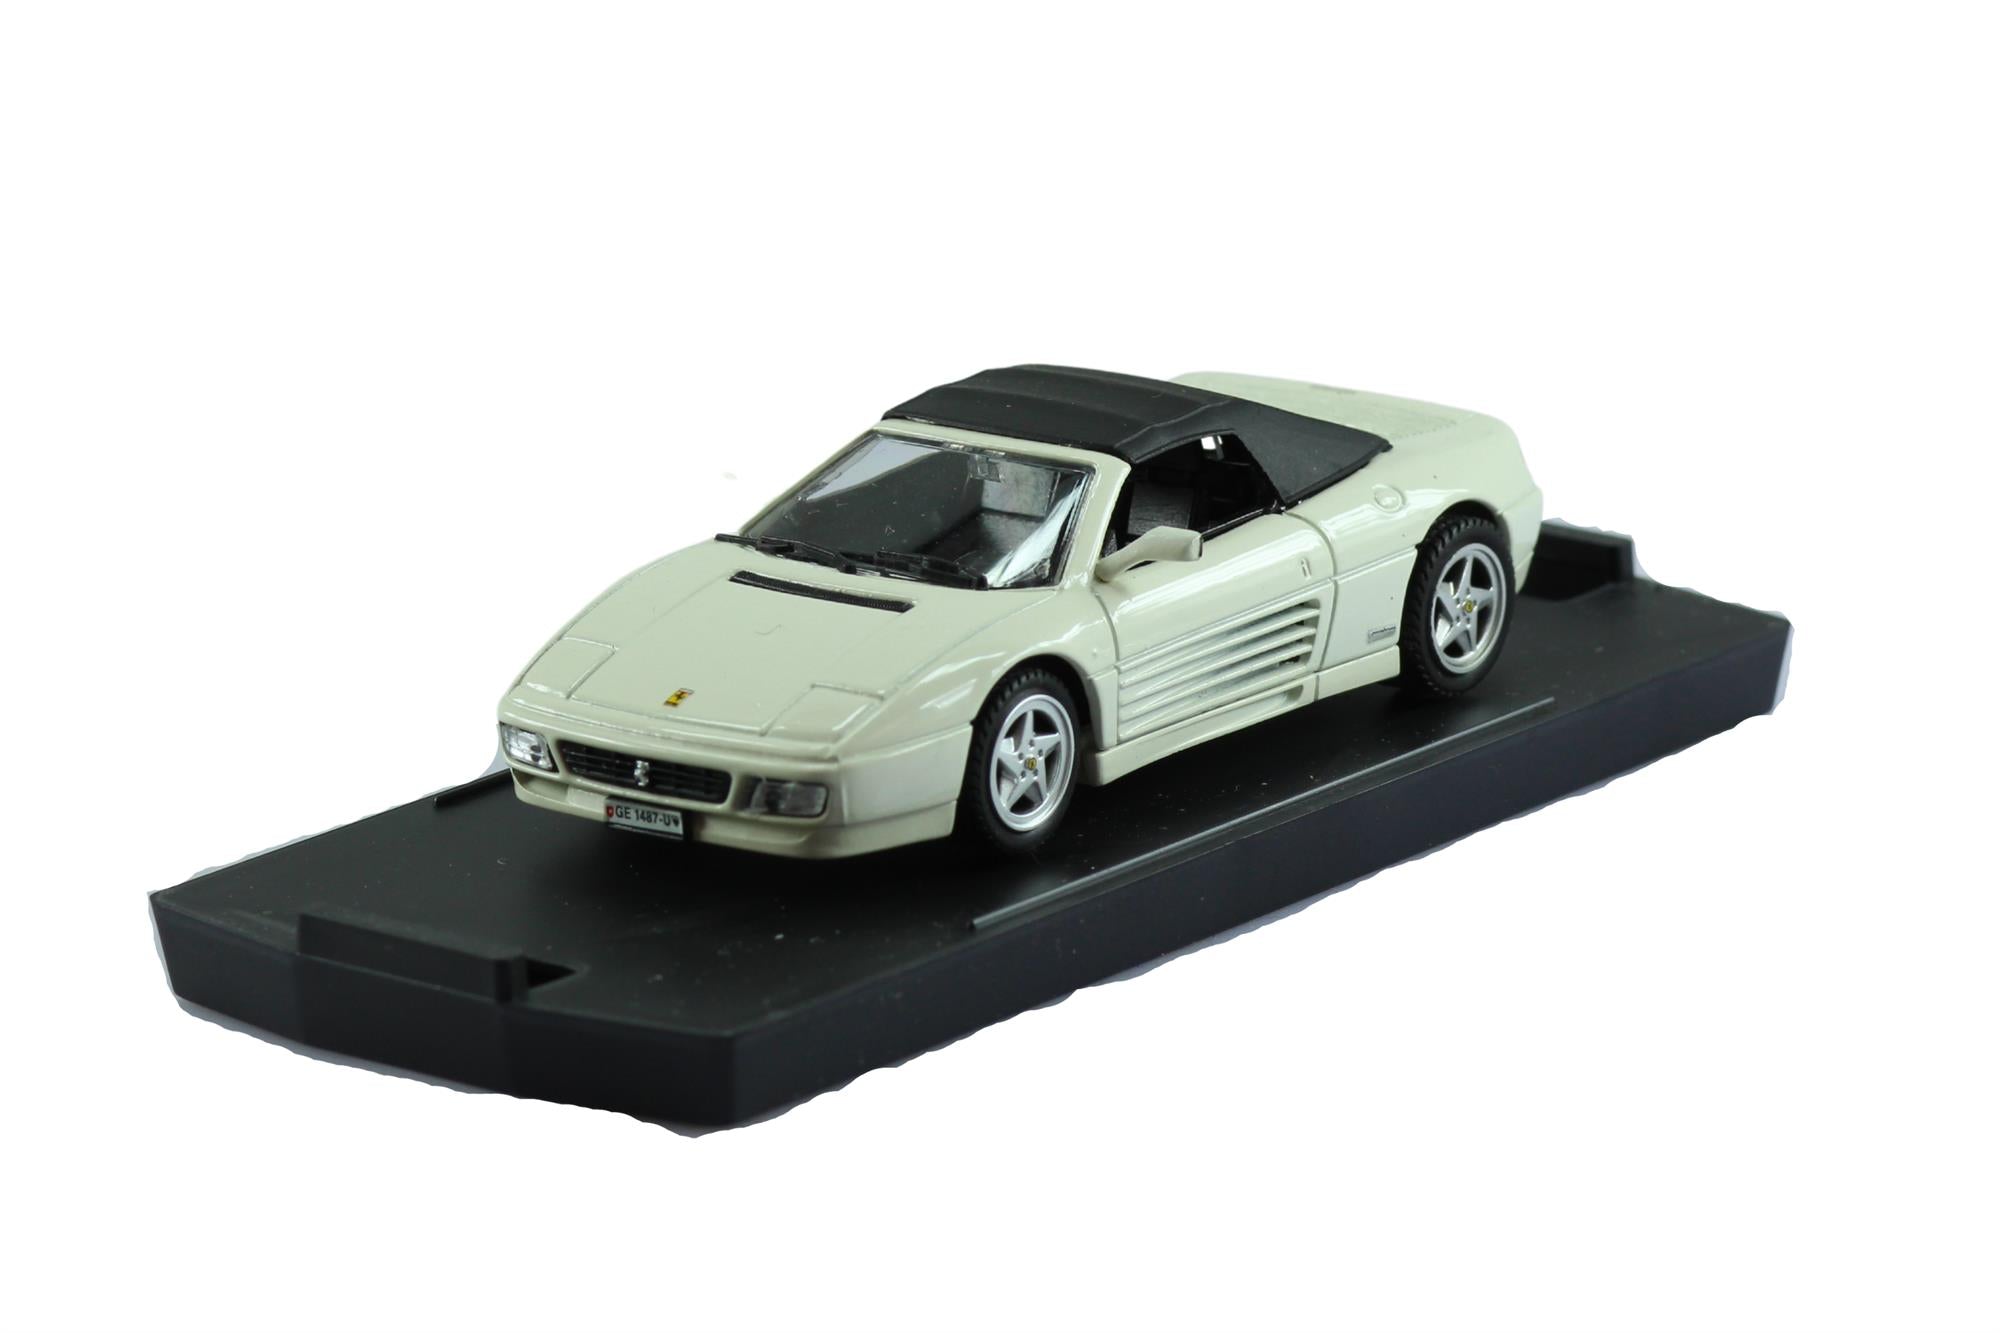 Bang Models - 1:43 Scale Diecast Ferrari 348 Spider in White - Made in Italy - Toptoys2u